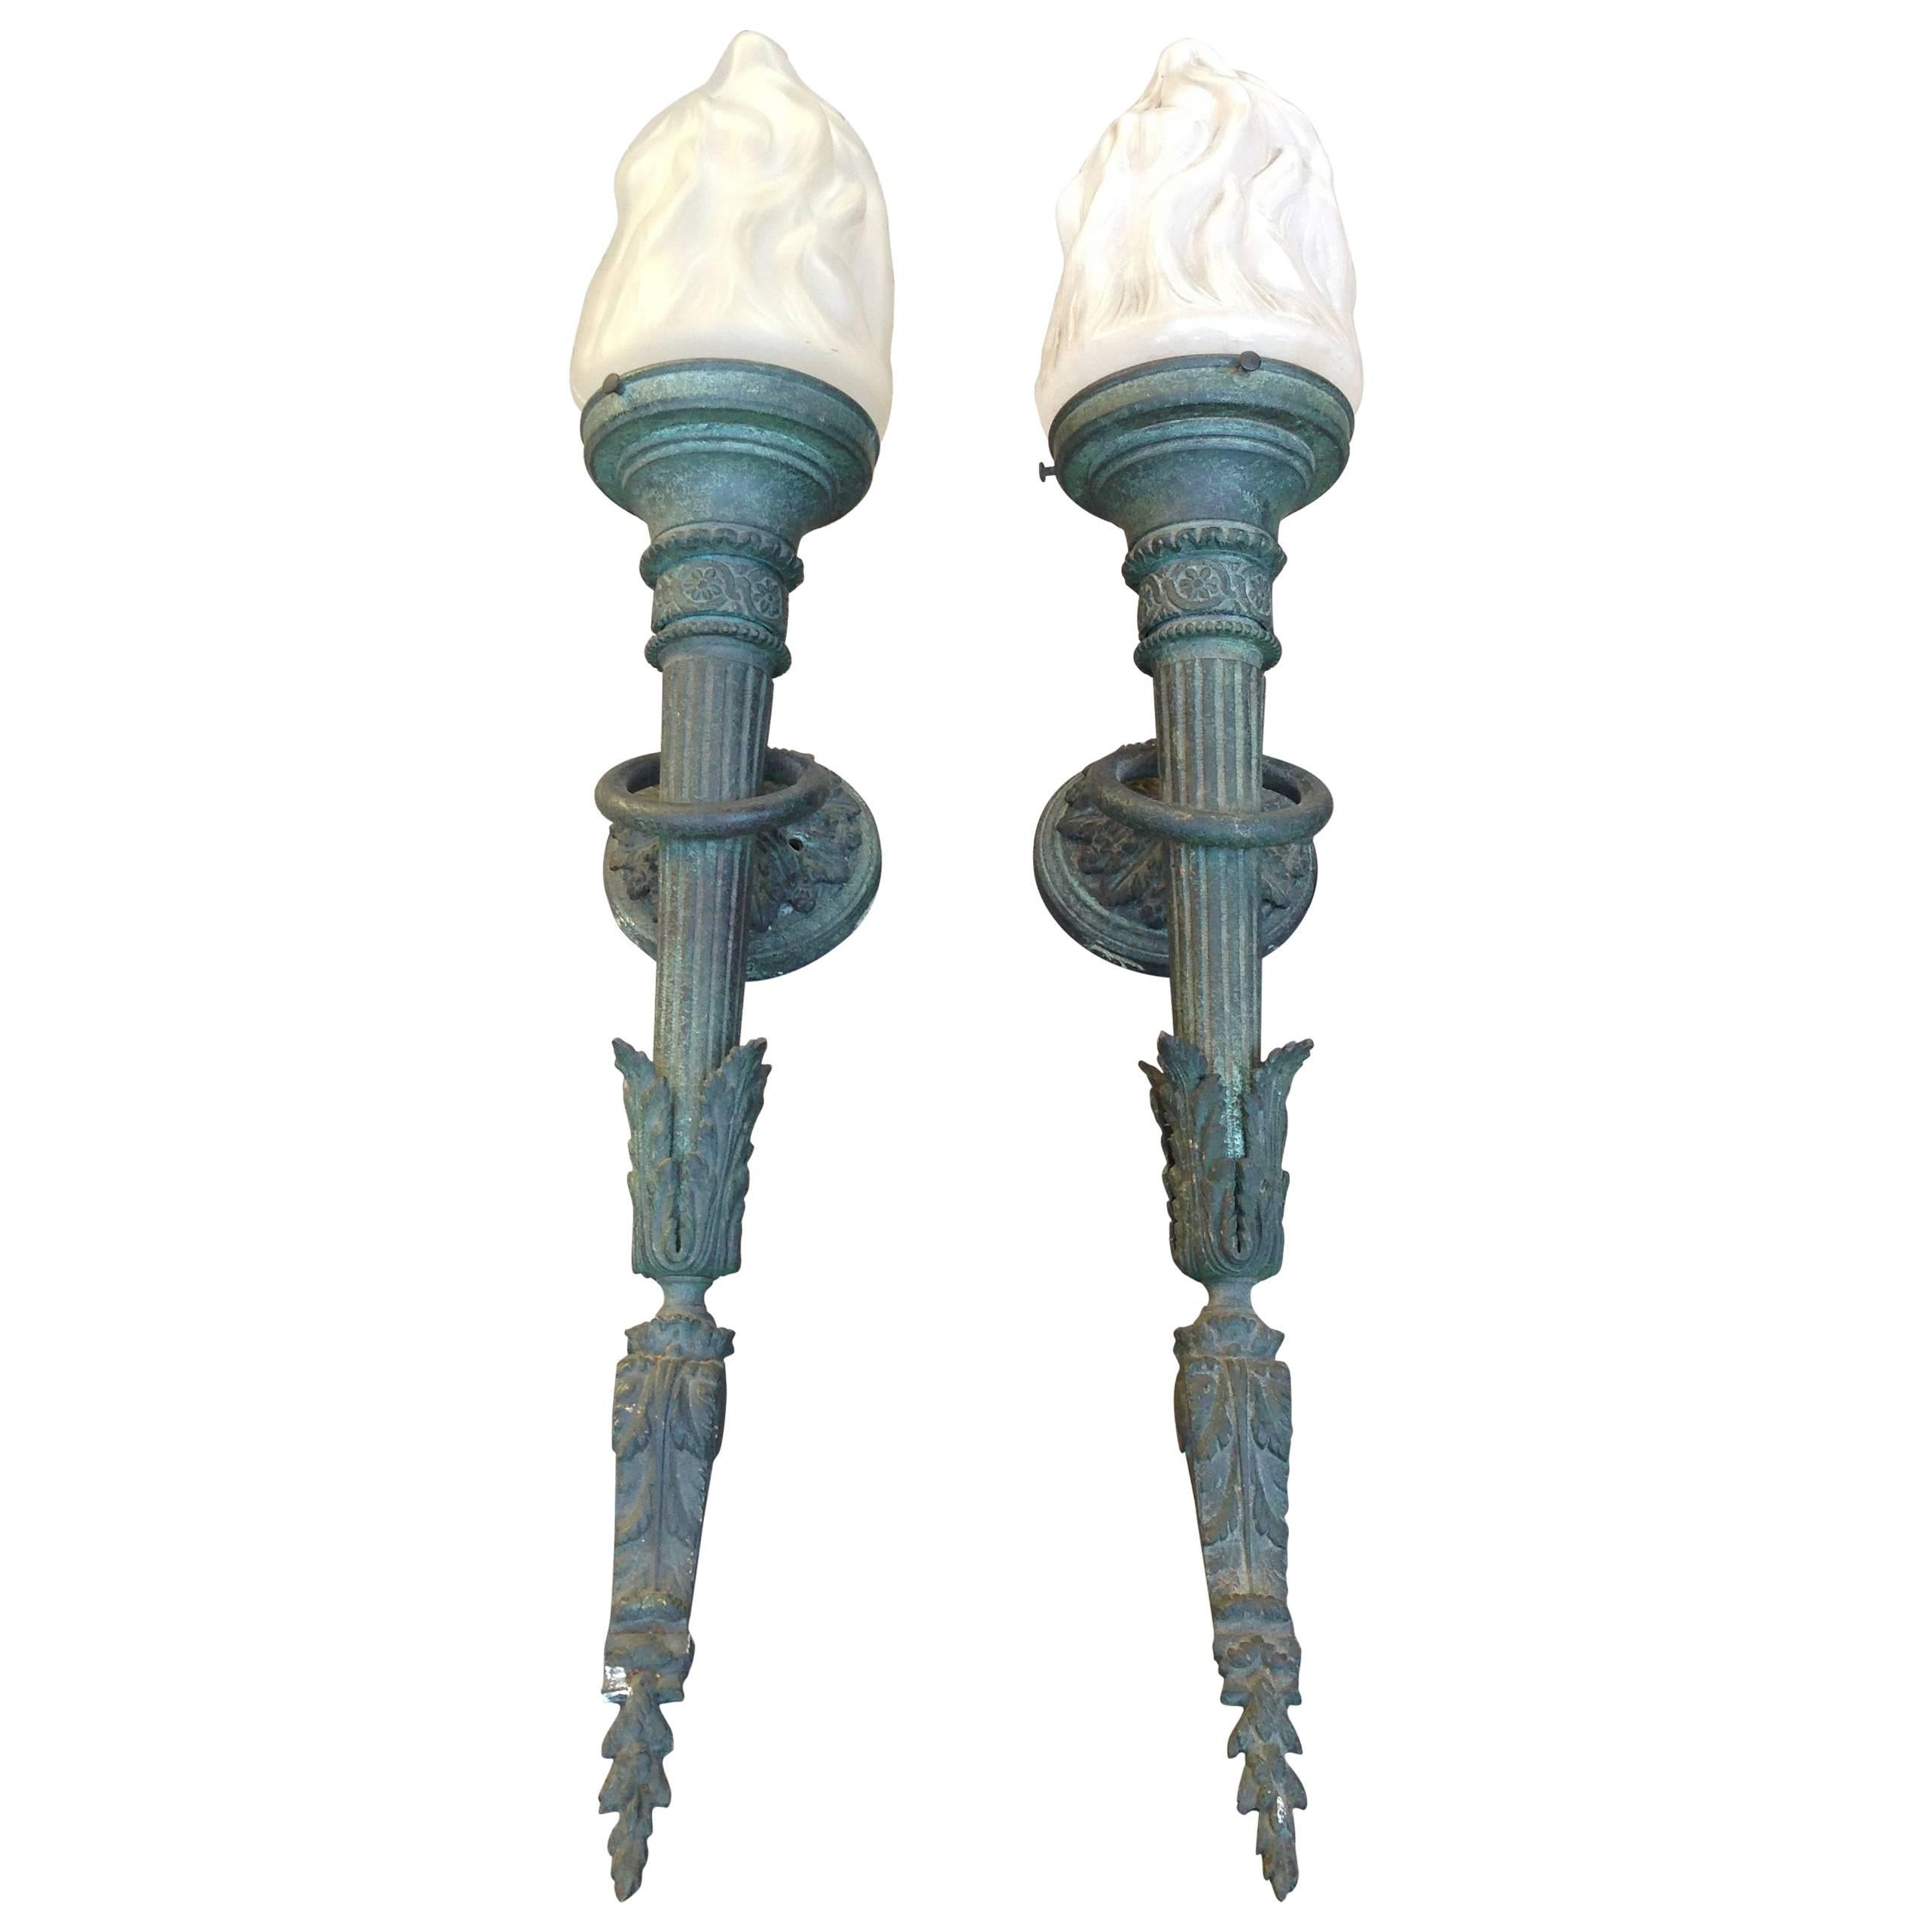 A pair of Beaux Art torch sconces in verdigris finish. Opaque glass flame form shades (slight variations to glass). Requires electrification.